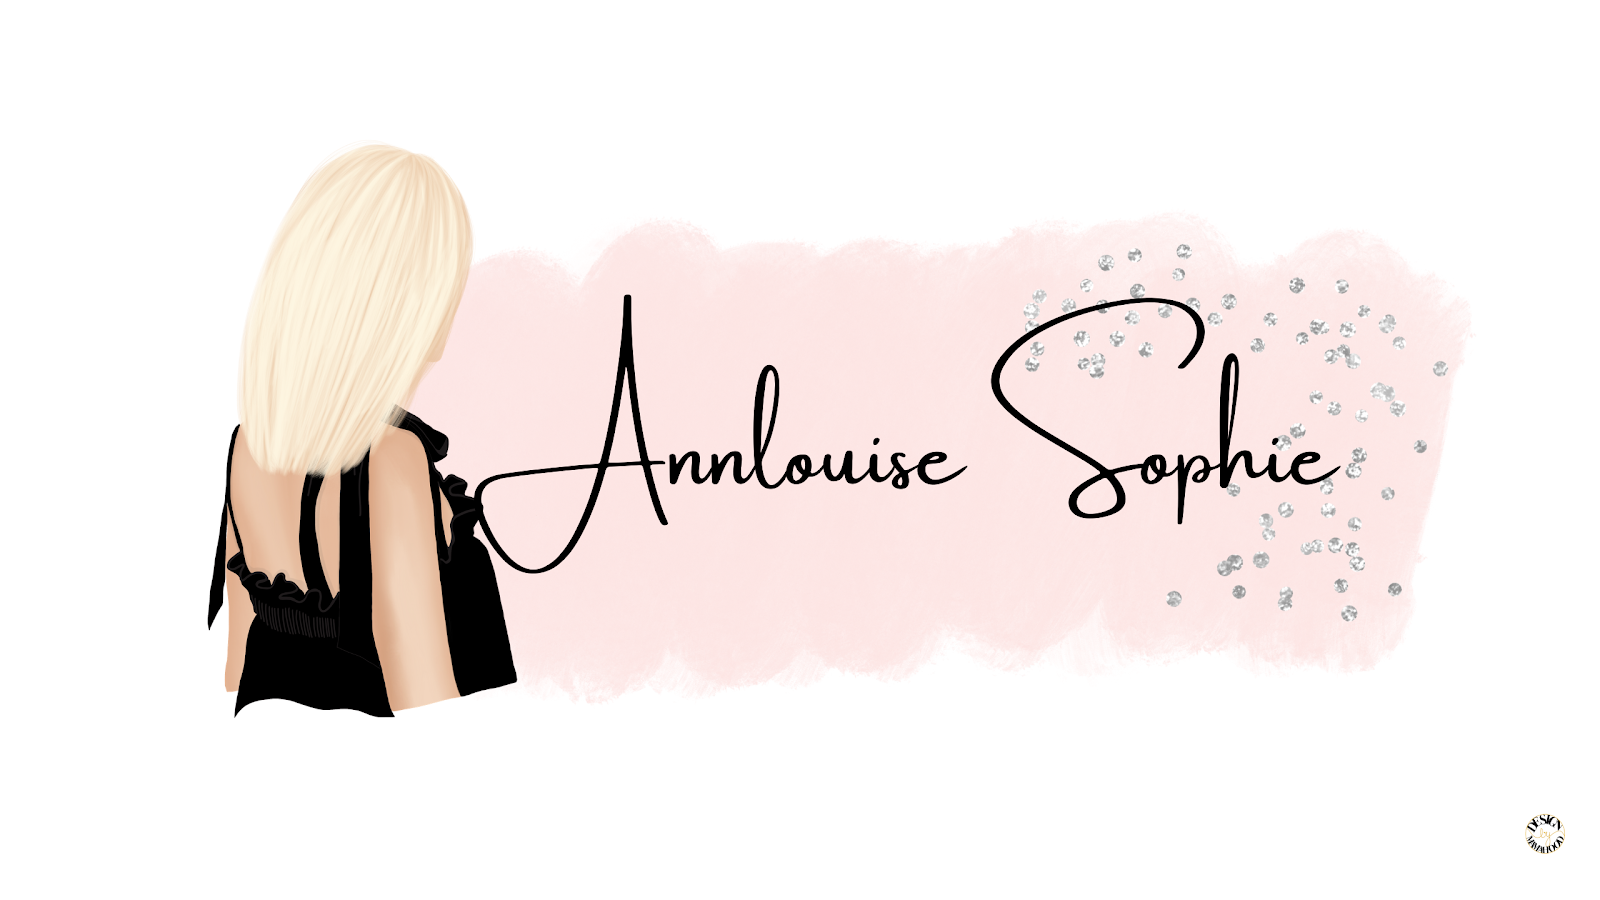 Annlouise Sophie